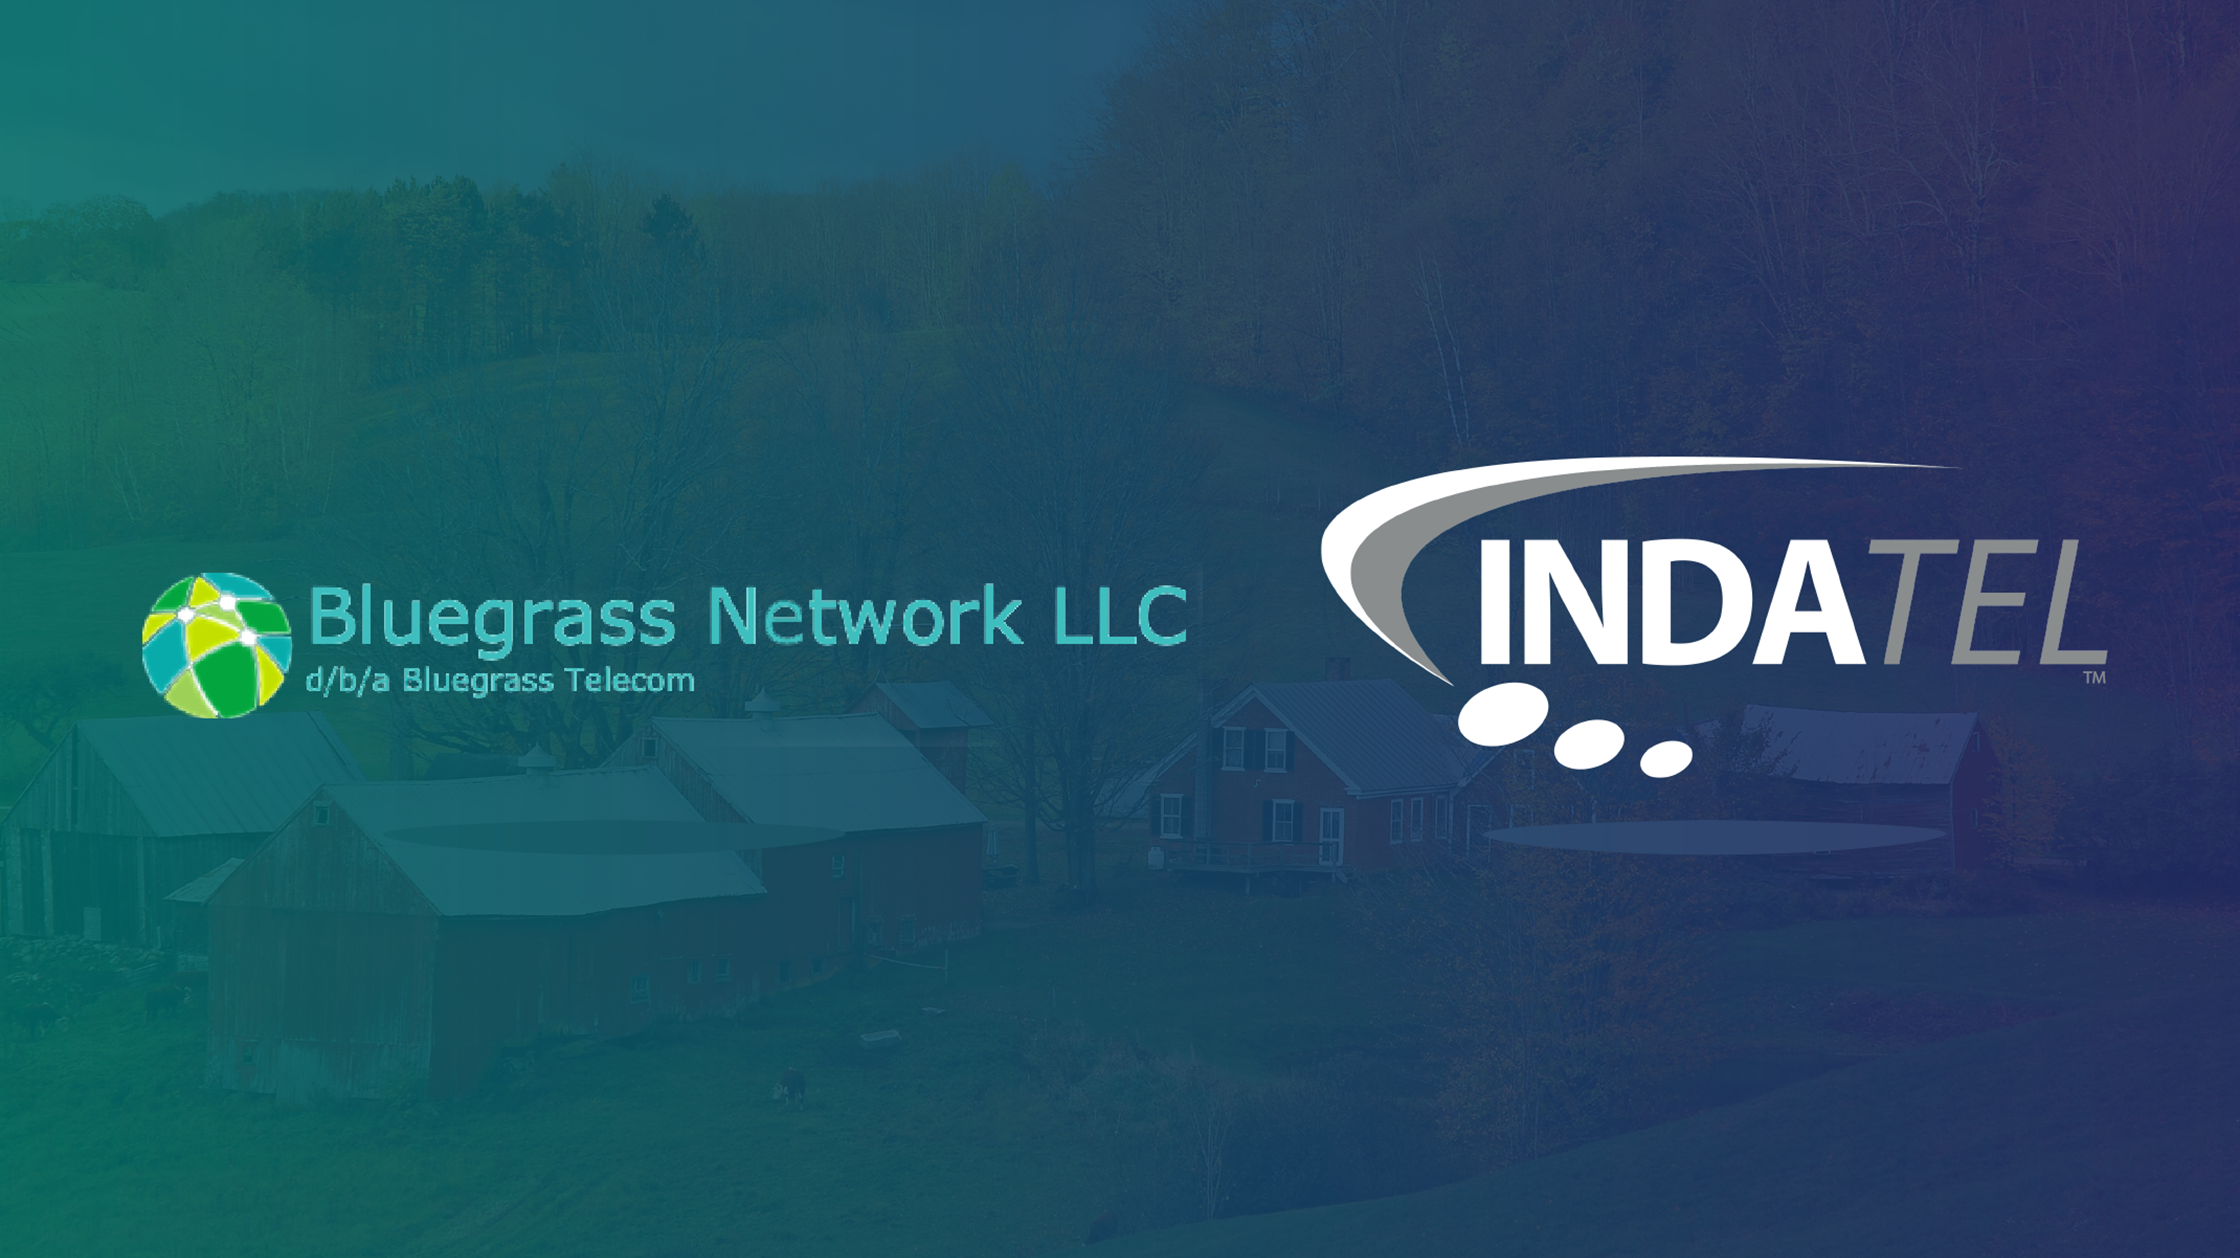 INDATEL Welcomes Bluegrass Network as New Member featured image